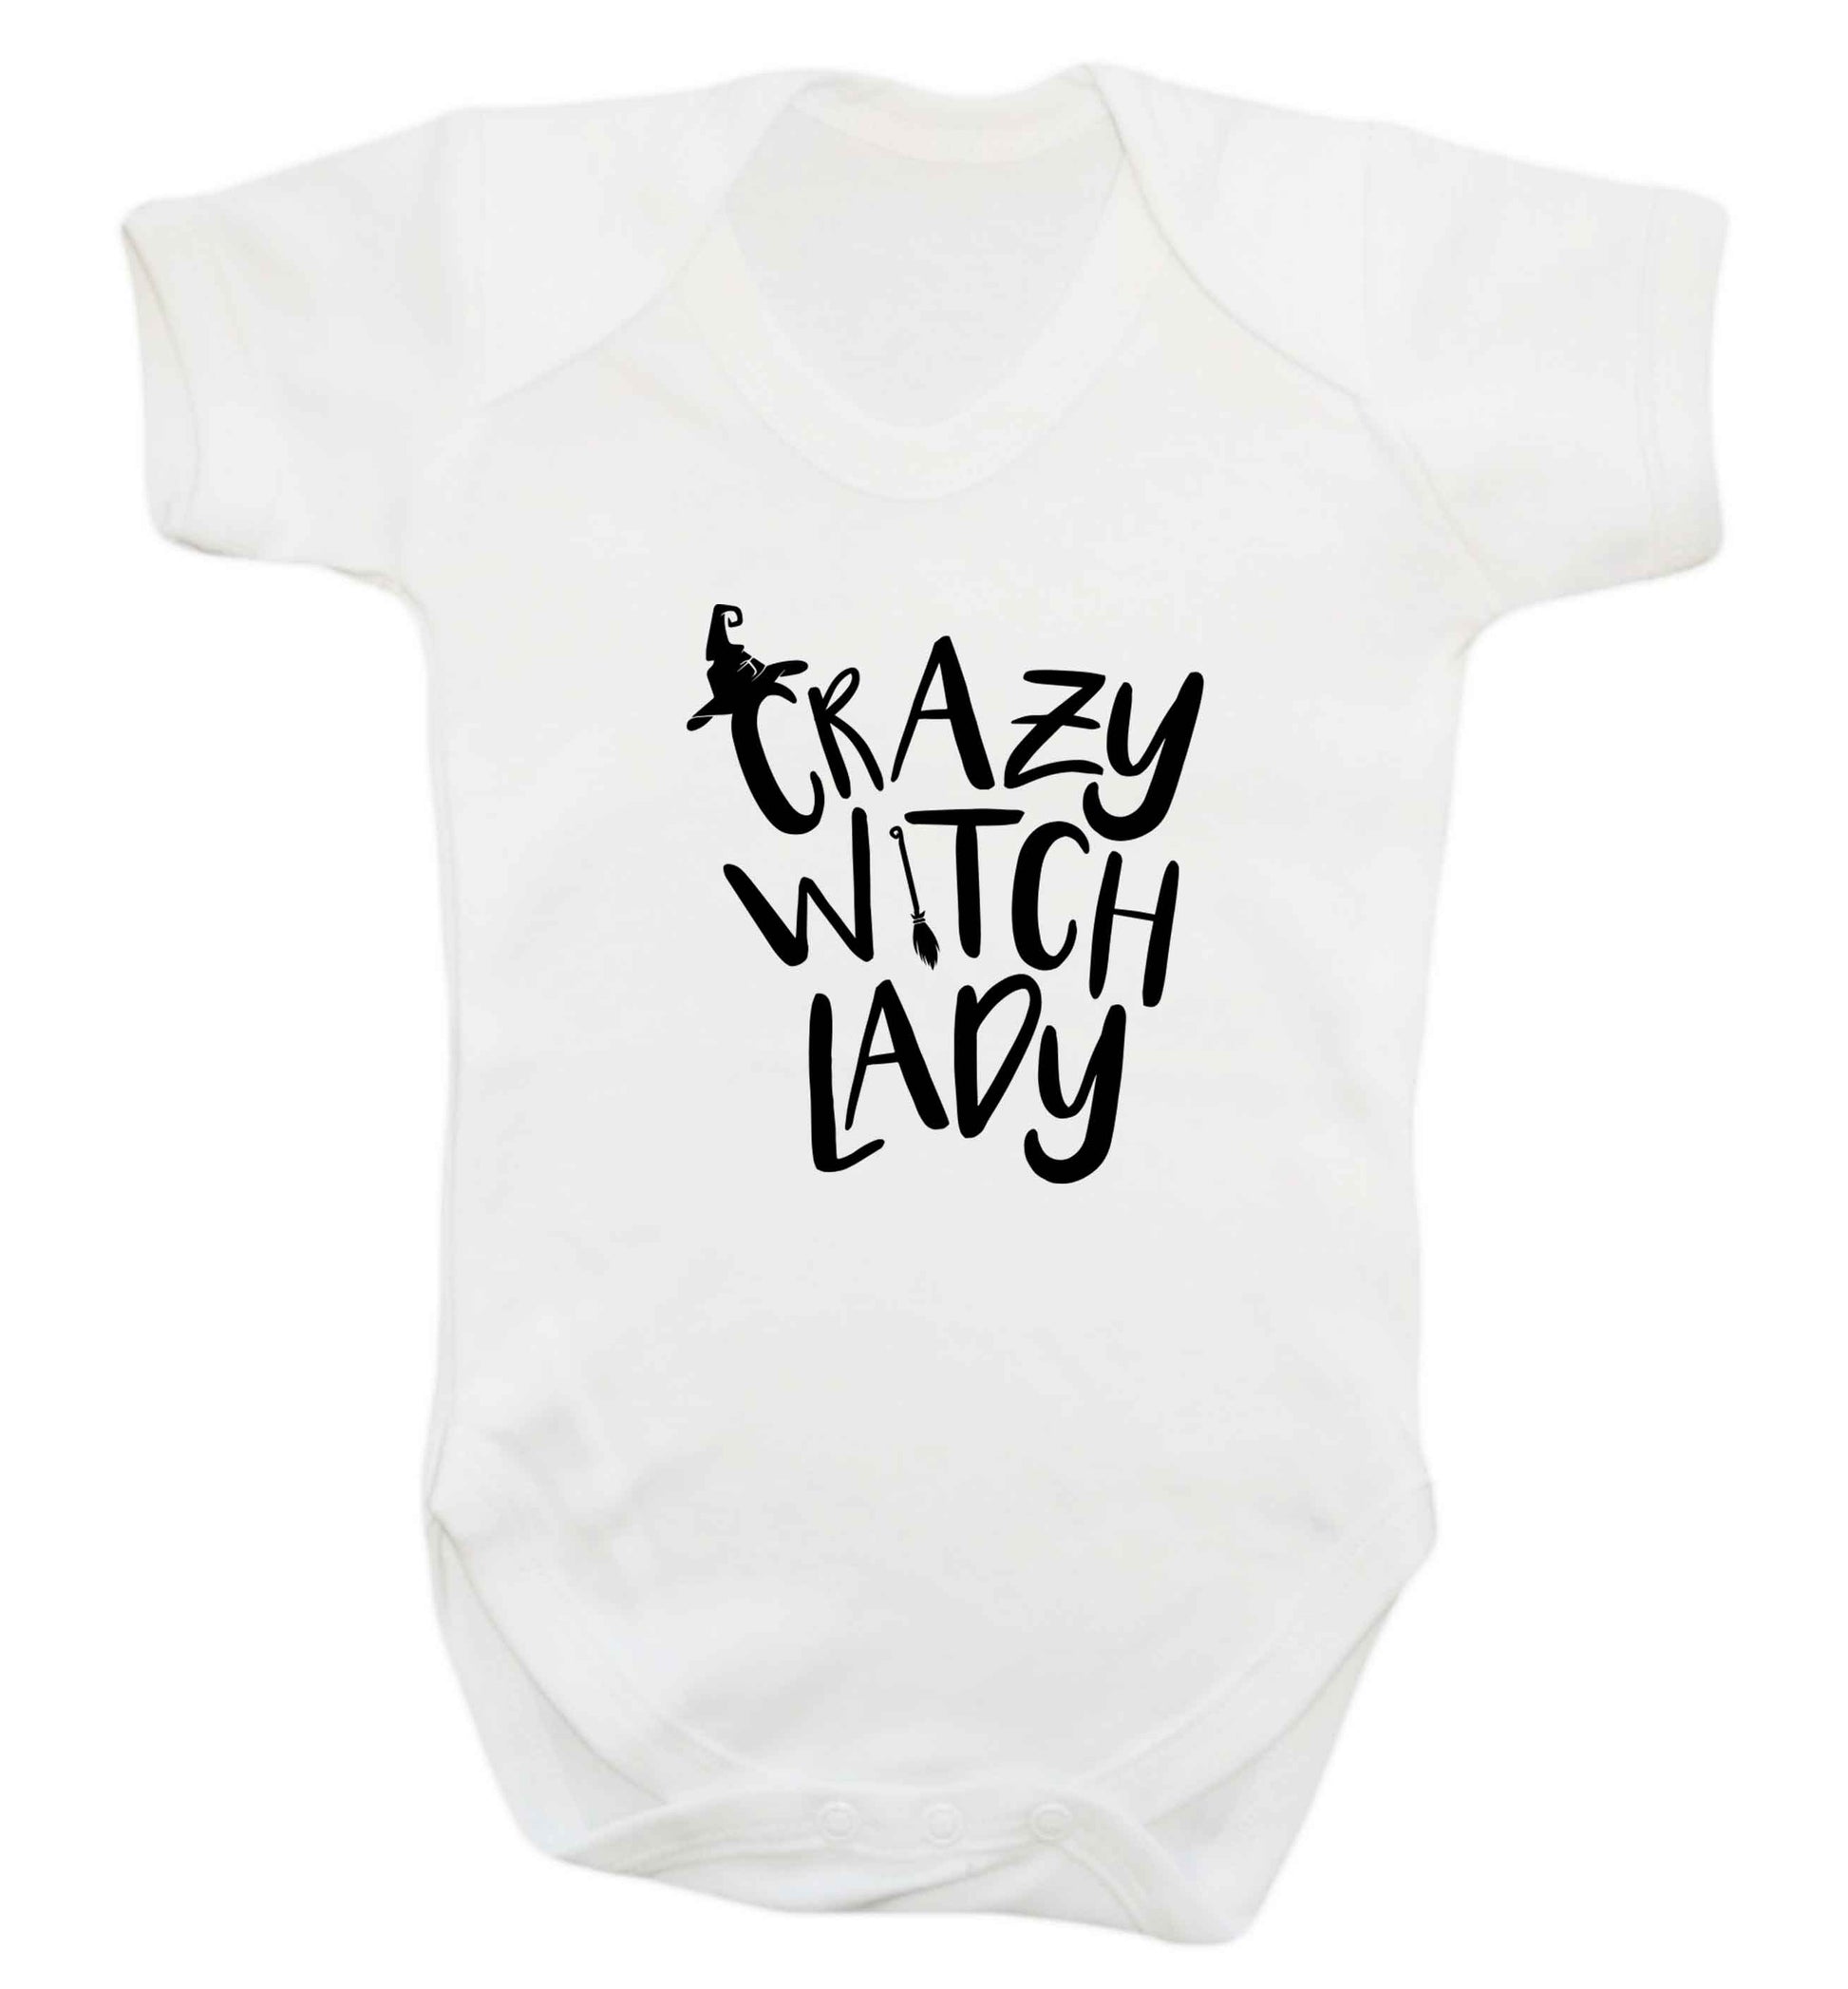 Crazy witch lady baby vest white 18-24 months